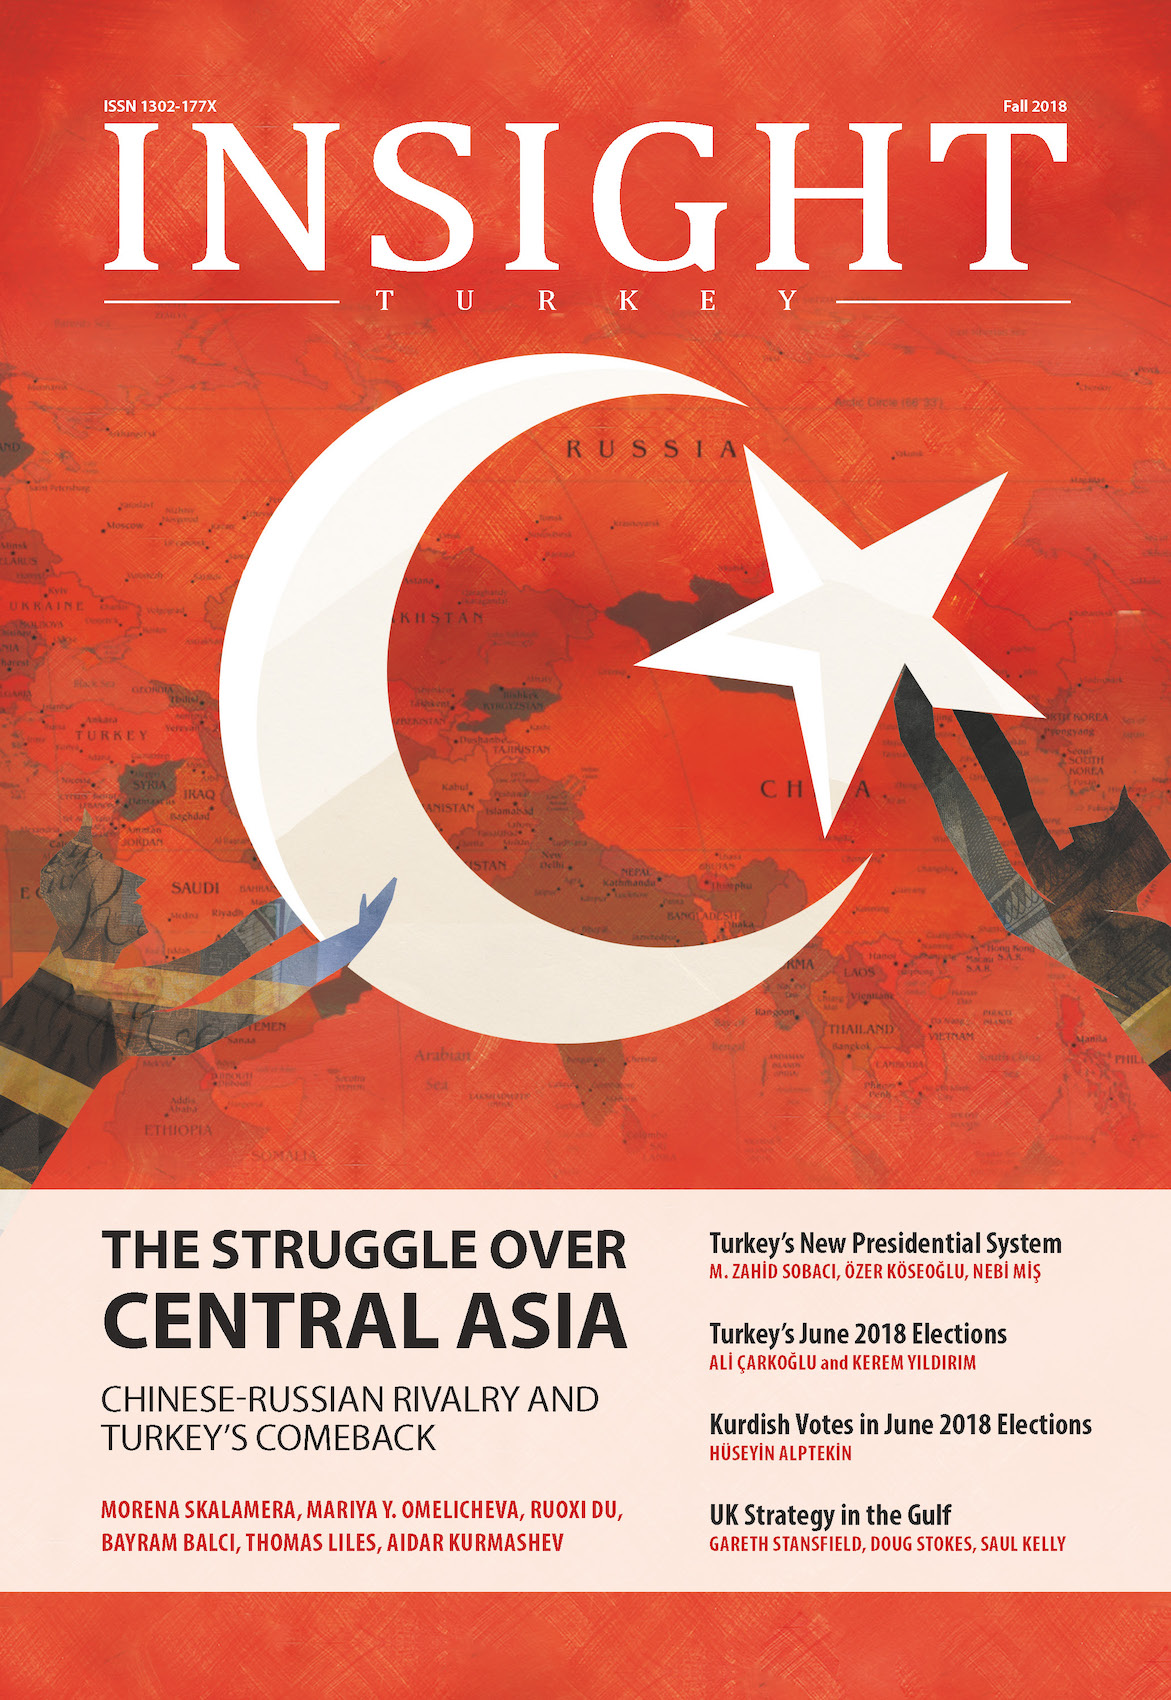 The Struggle over Central Asia Chinese-Russian Rivalry and Turkey's Comeback